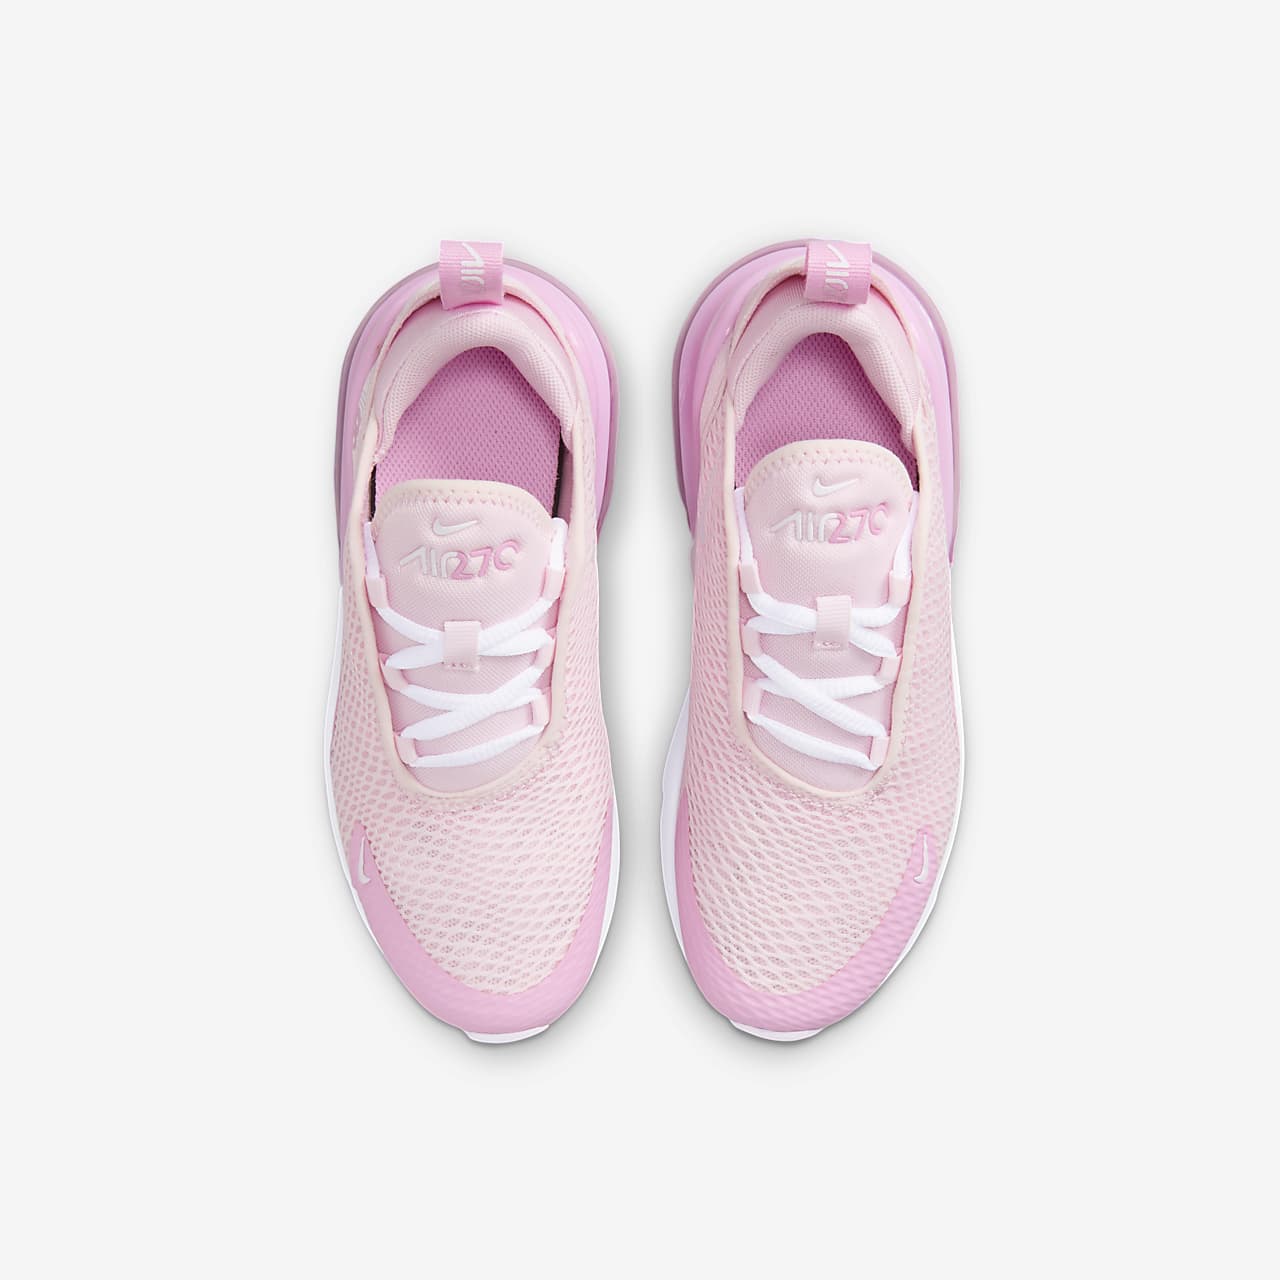 270 nike shoes pink